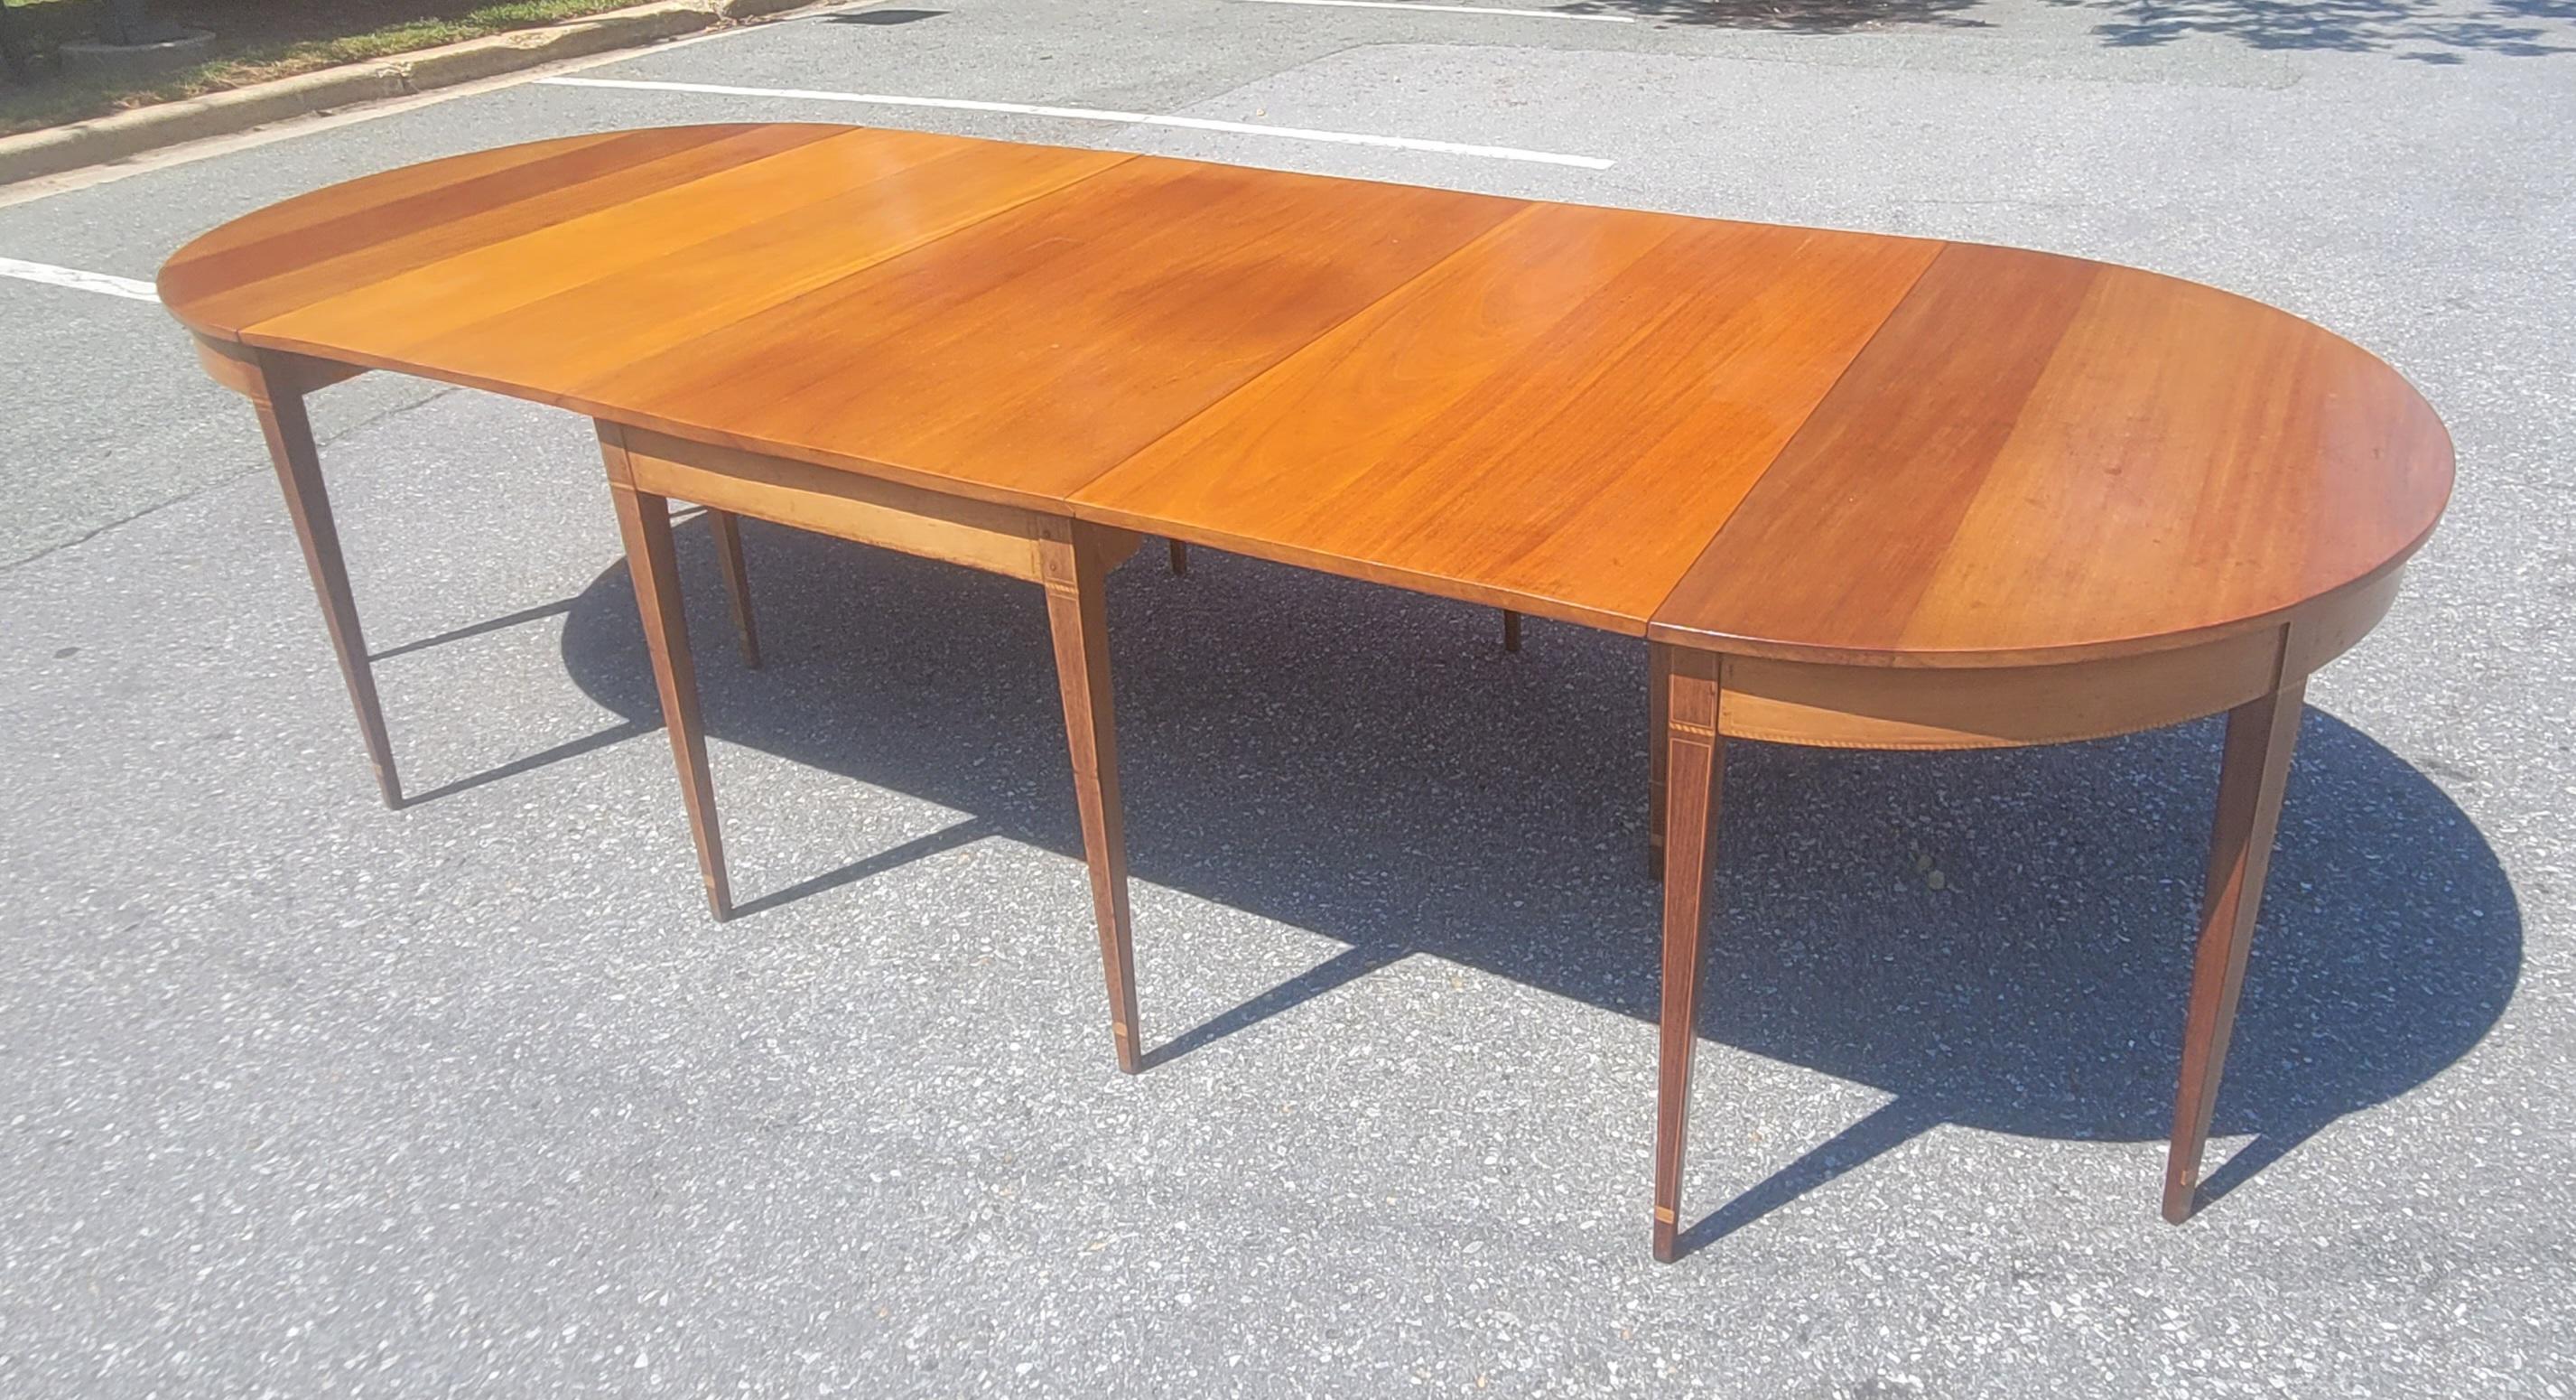 An amazing 1930s American Federal Inlaid Mahogany Three Part, 14 legs Banquet  Dining Table . Measures 126